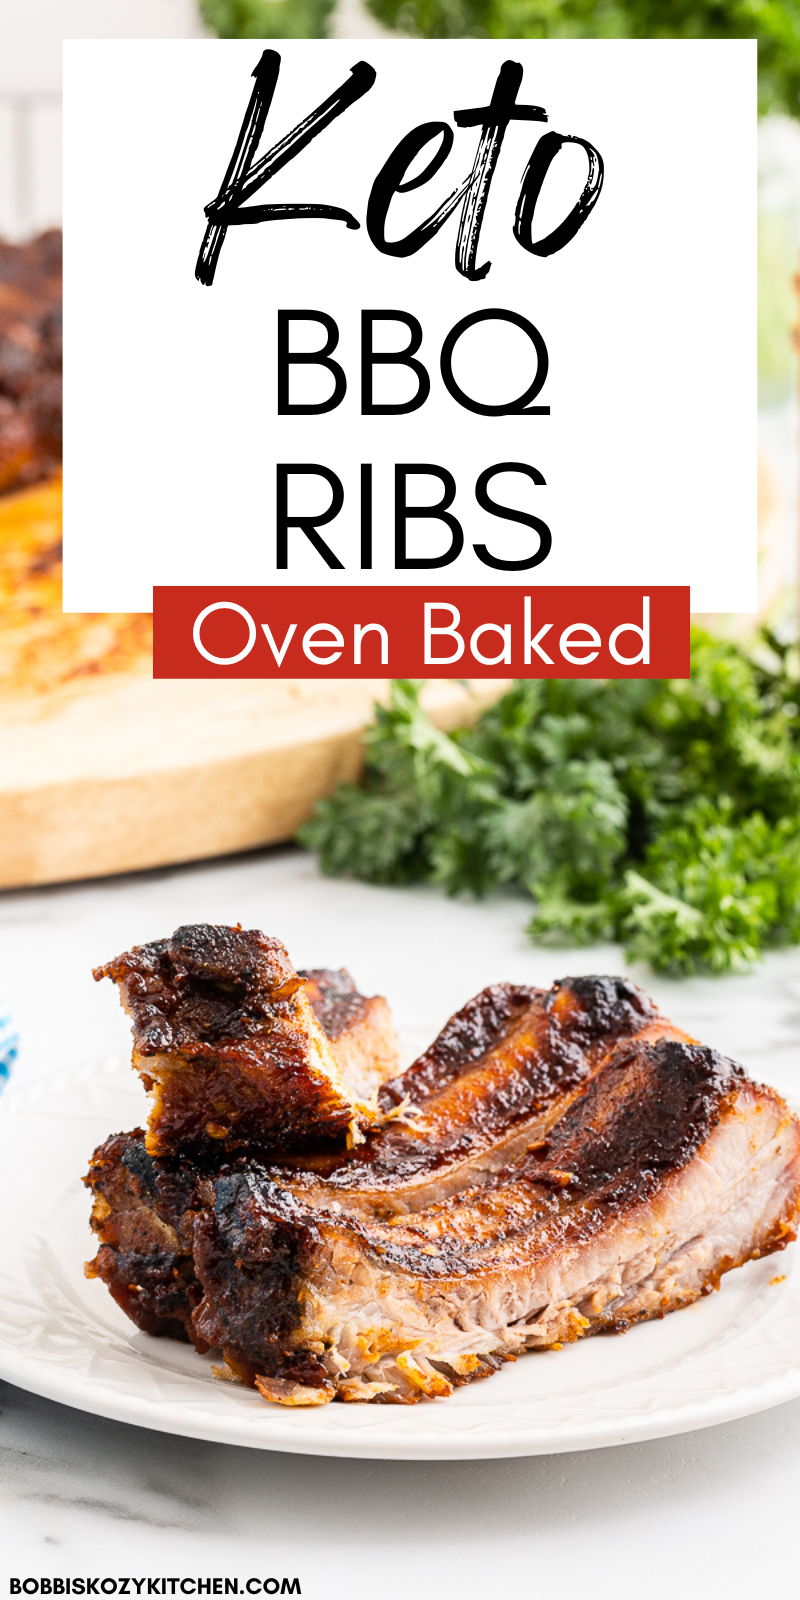 Keto BBQ Ribs - These oven-baked sugar-free Keto BBQ Ribs are easy to make, boldly flavorful, and fall-off-the-bone tender. Once you try them you may never make ribs any other way again! #keto #lowcarb #glutenfree #sugarfree #bbq #ovenbaked #ribs